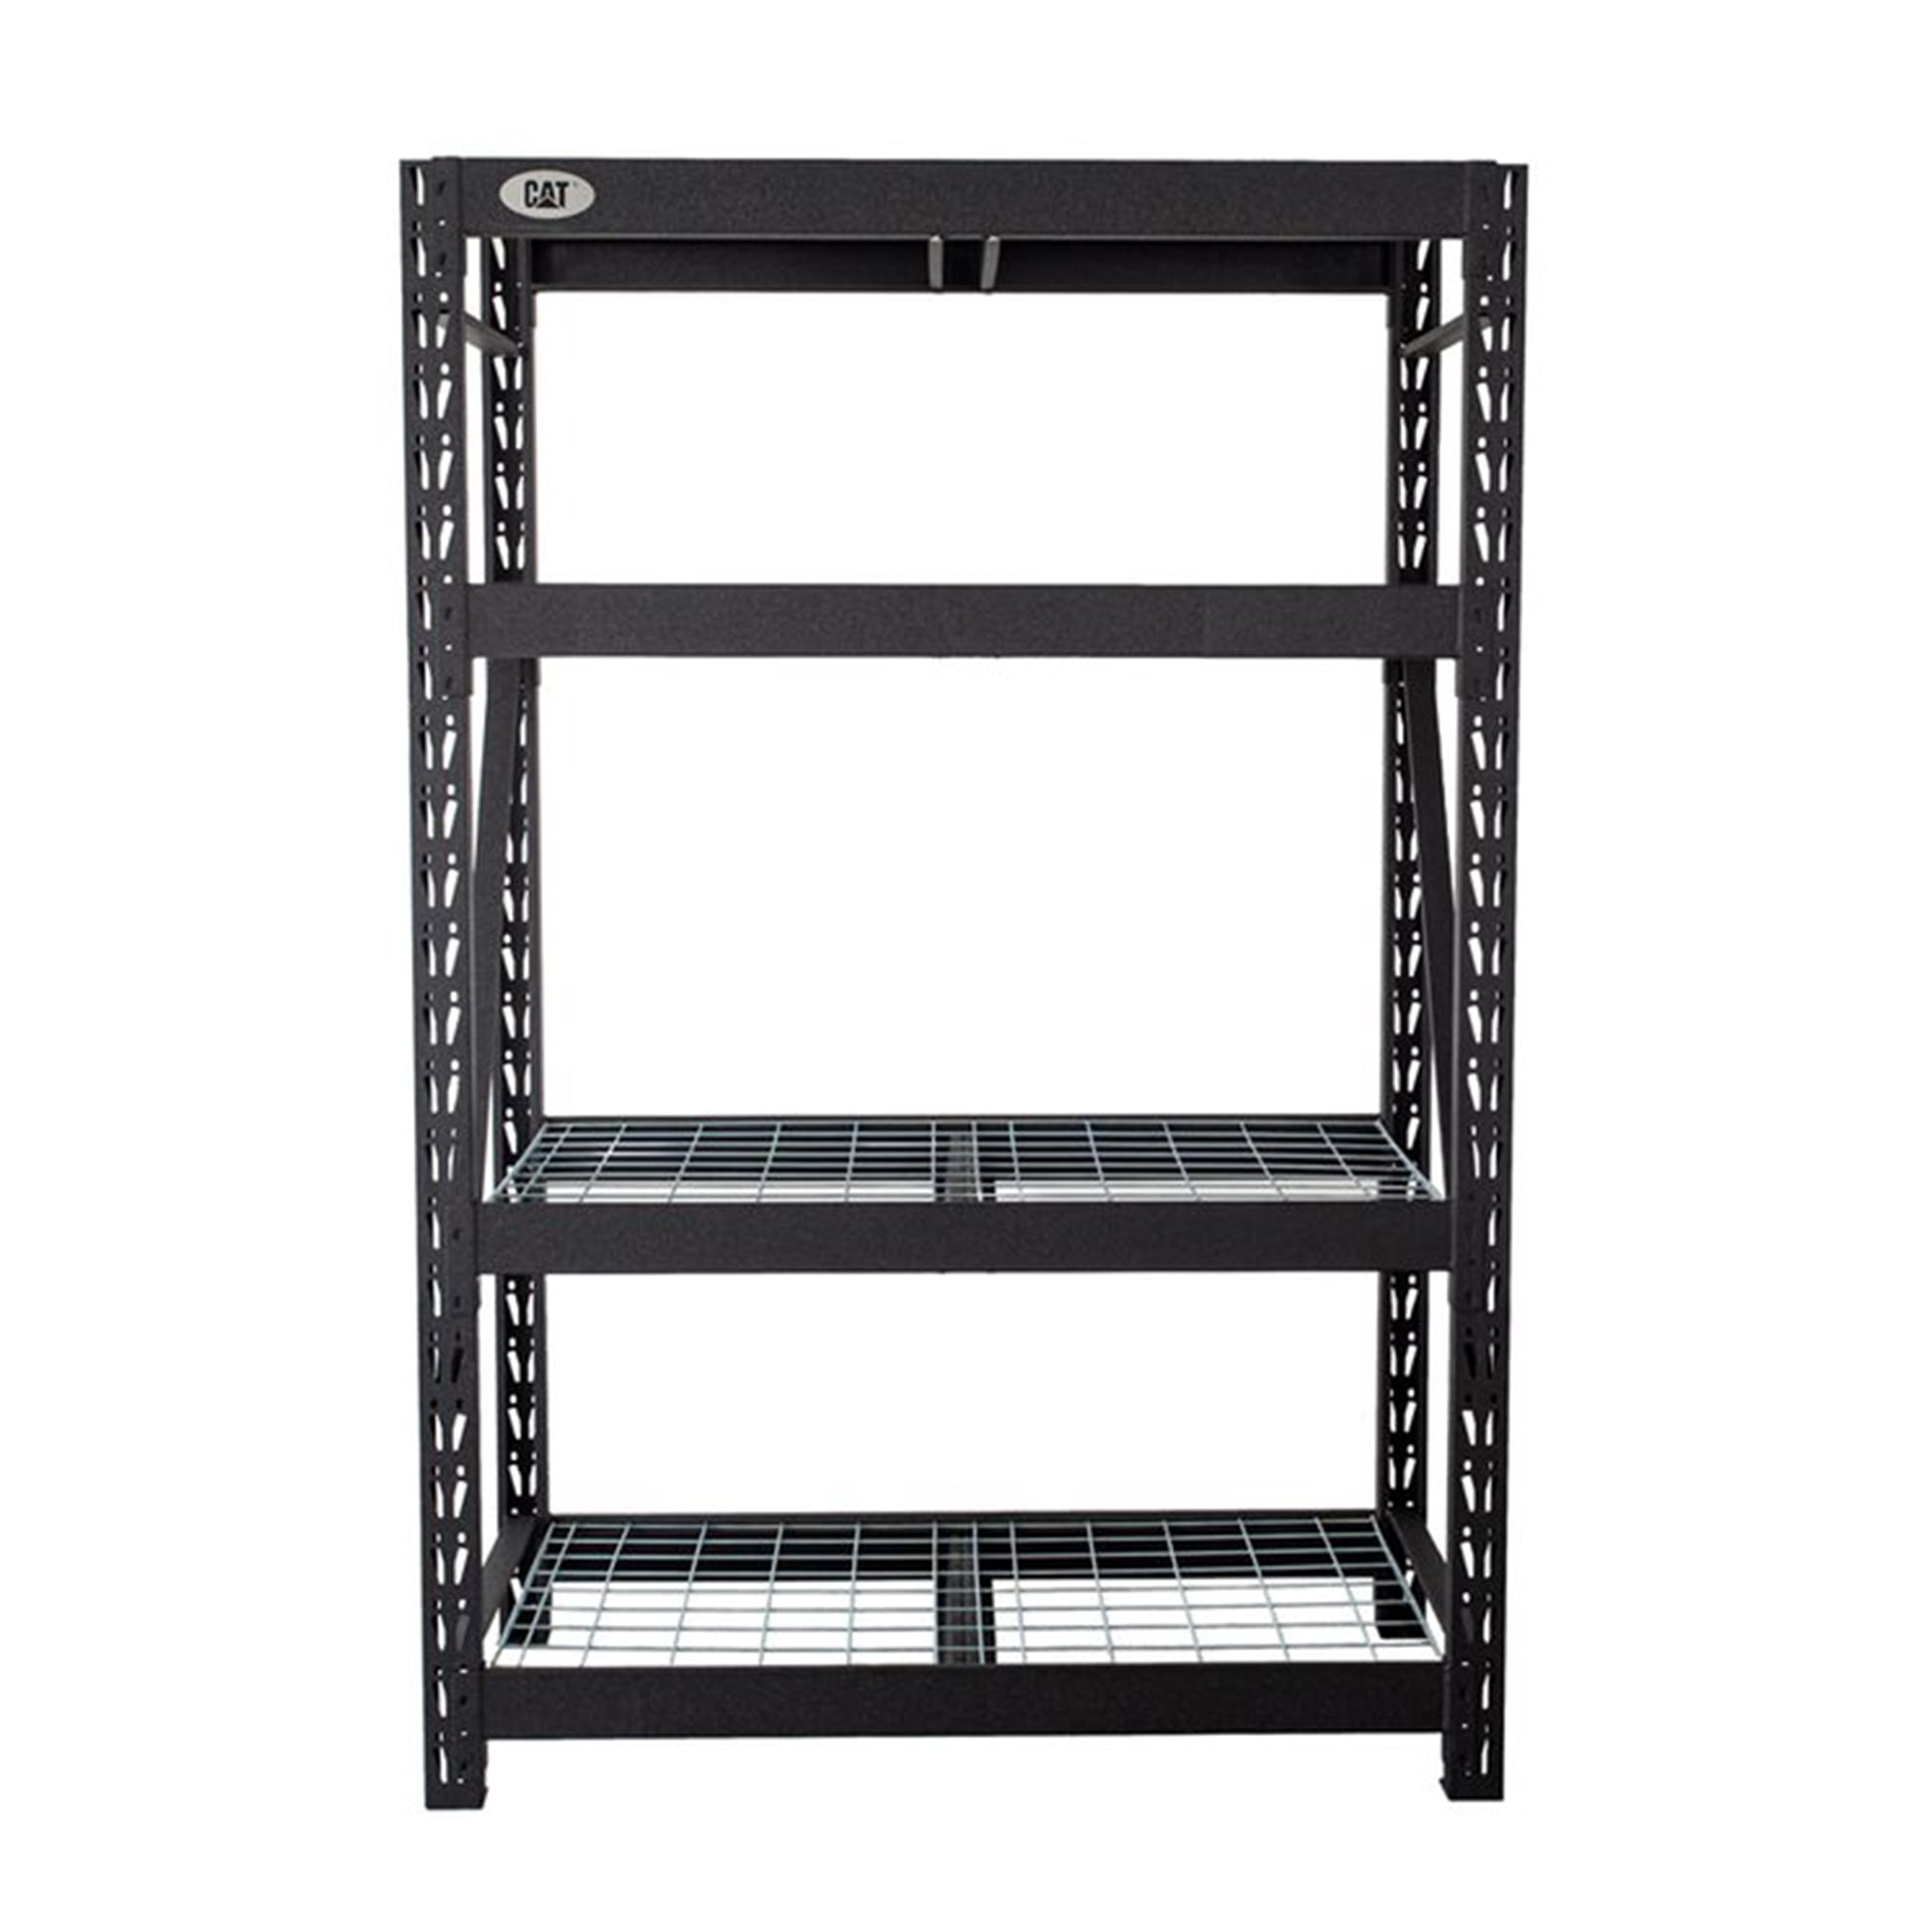 WEN RK7724-4 Four-Tier Industrial Steel Storage Rack with Adjustable Shelving and 8000-Pound Capacity